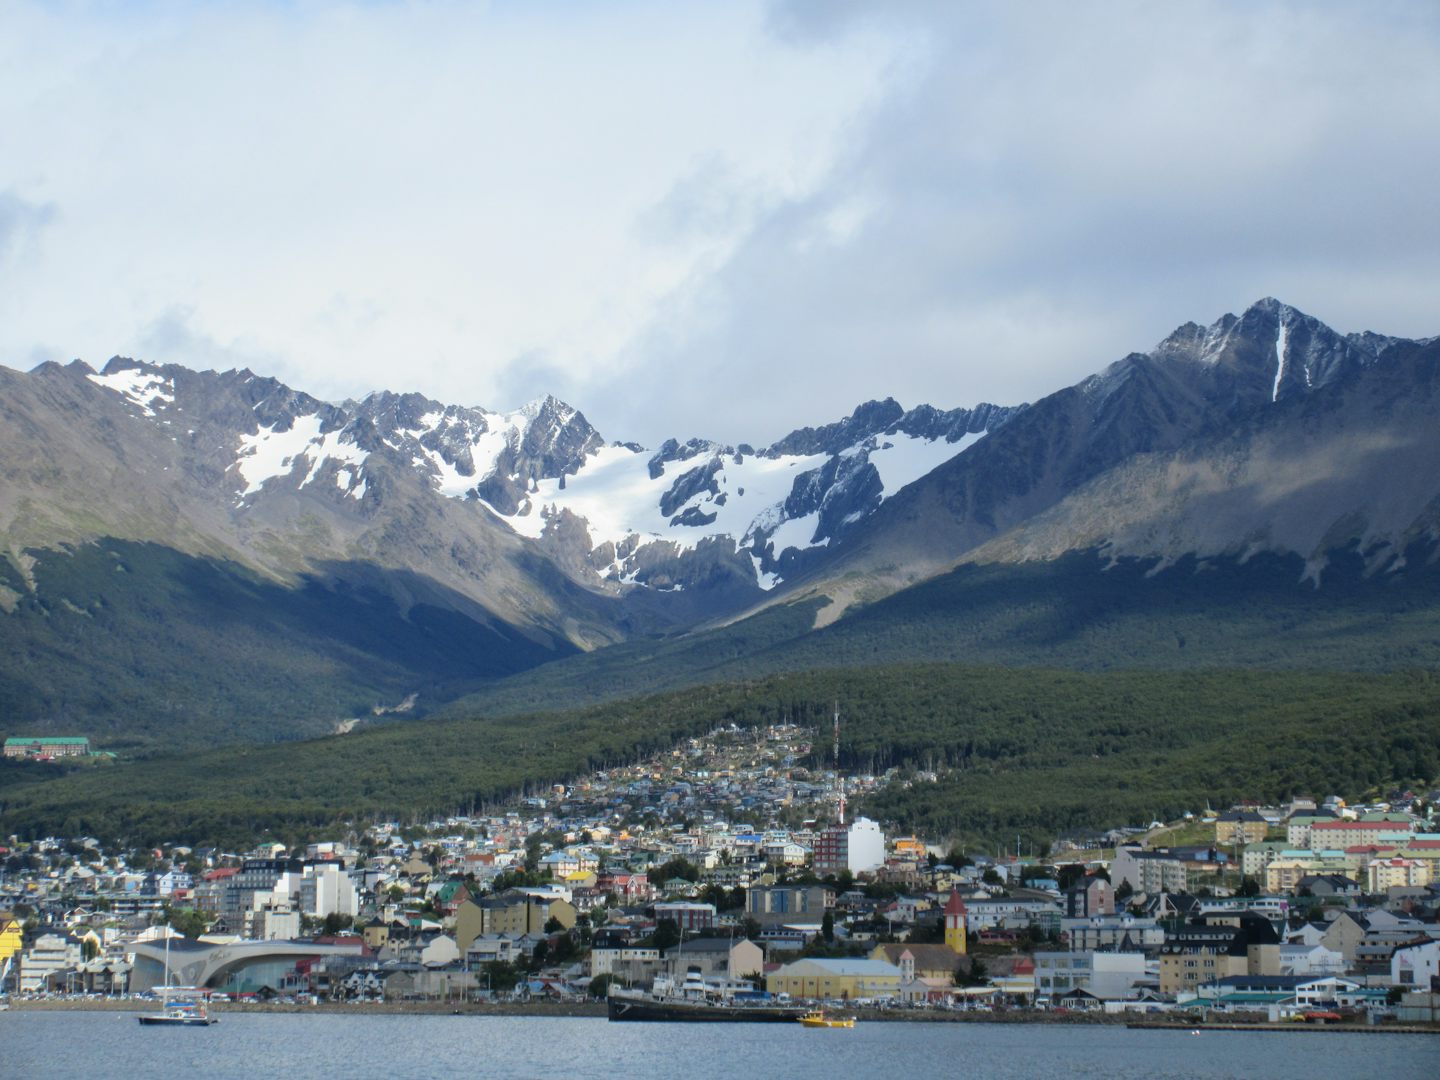 'The end of the world' - Ushuaia